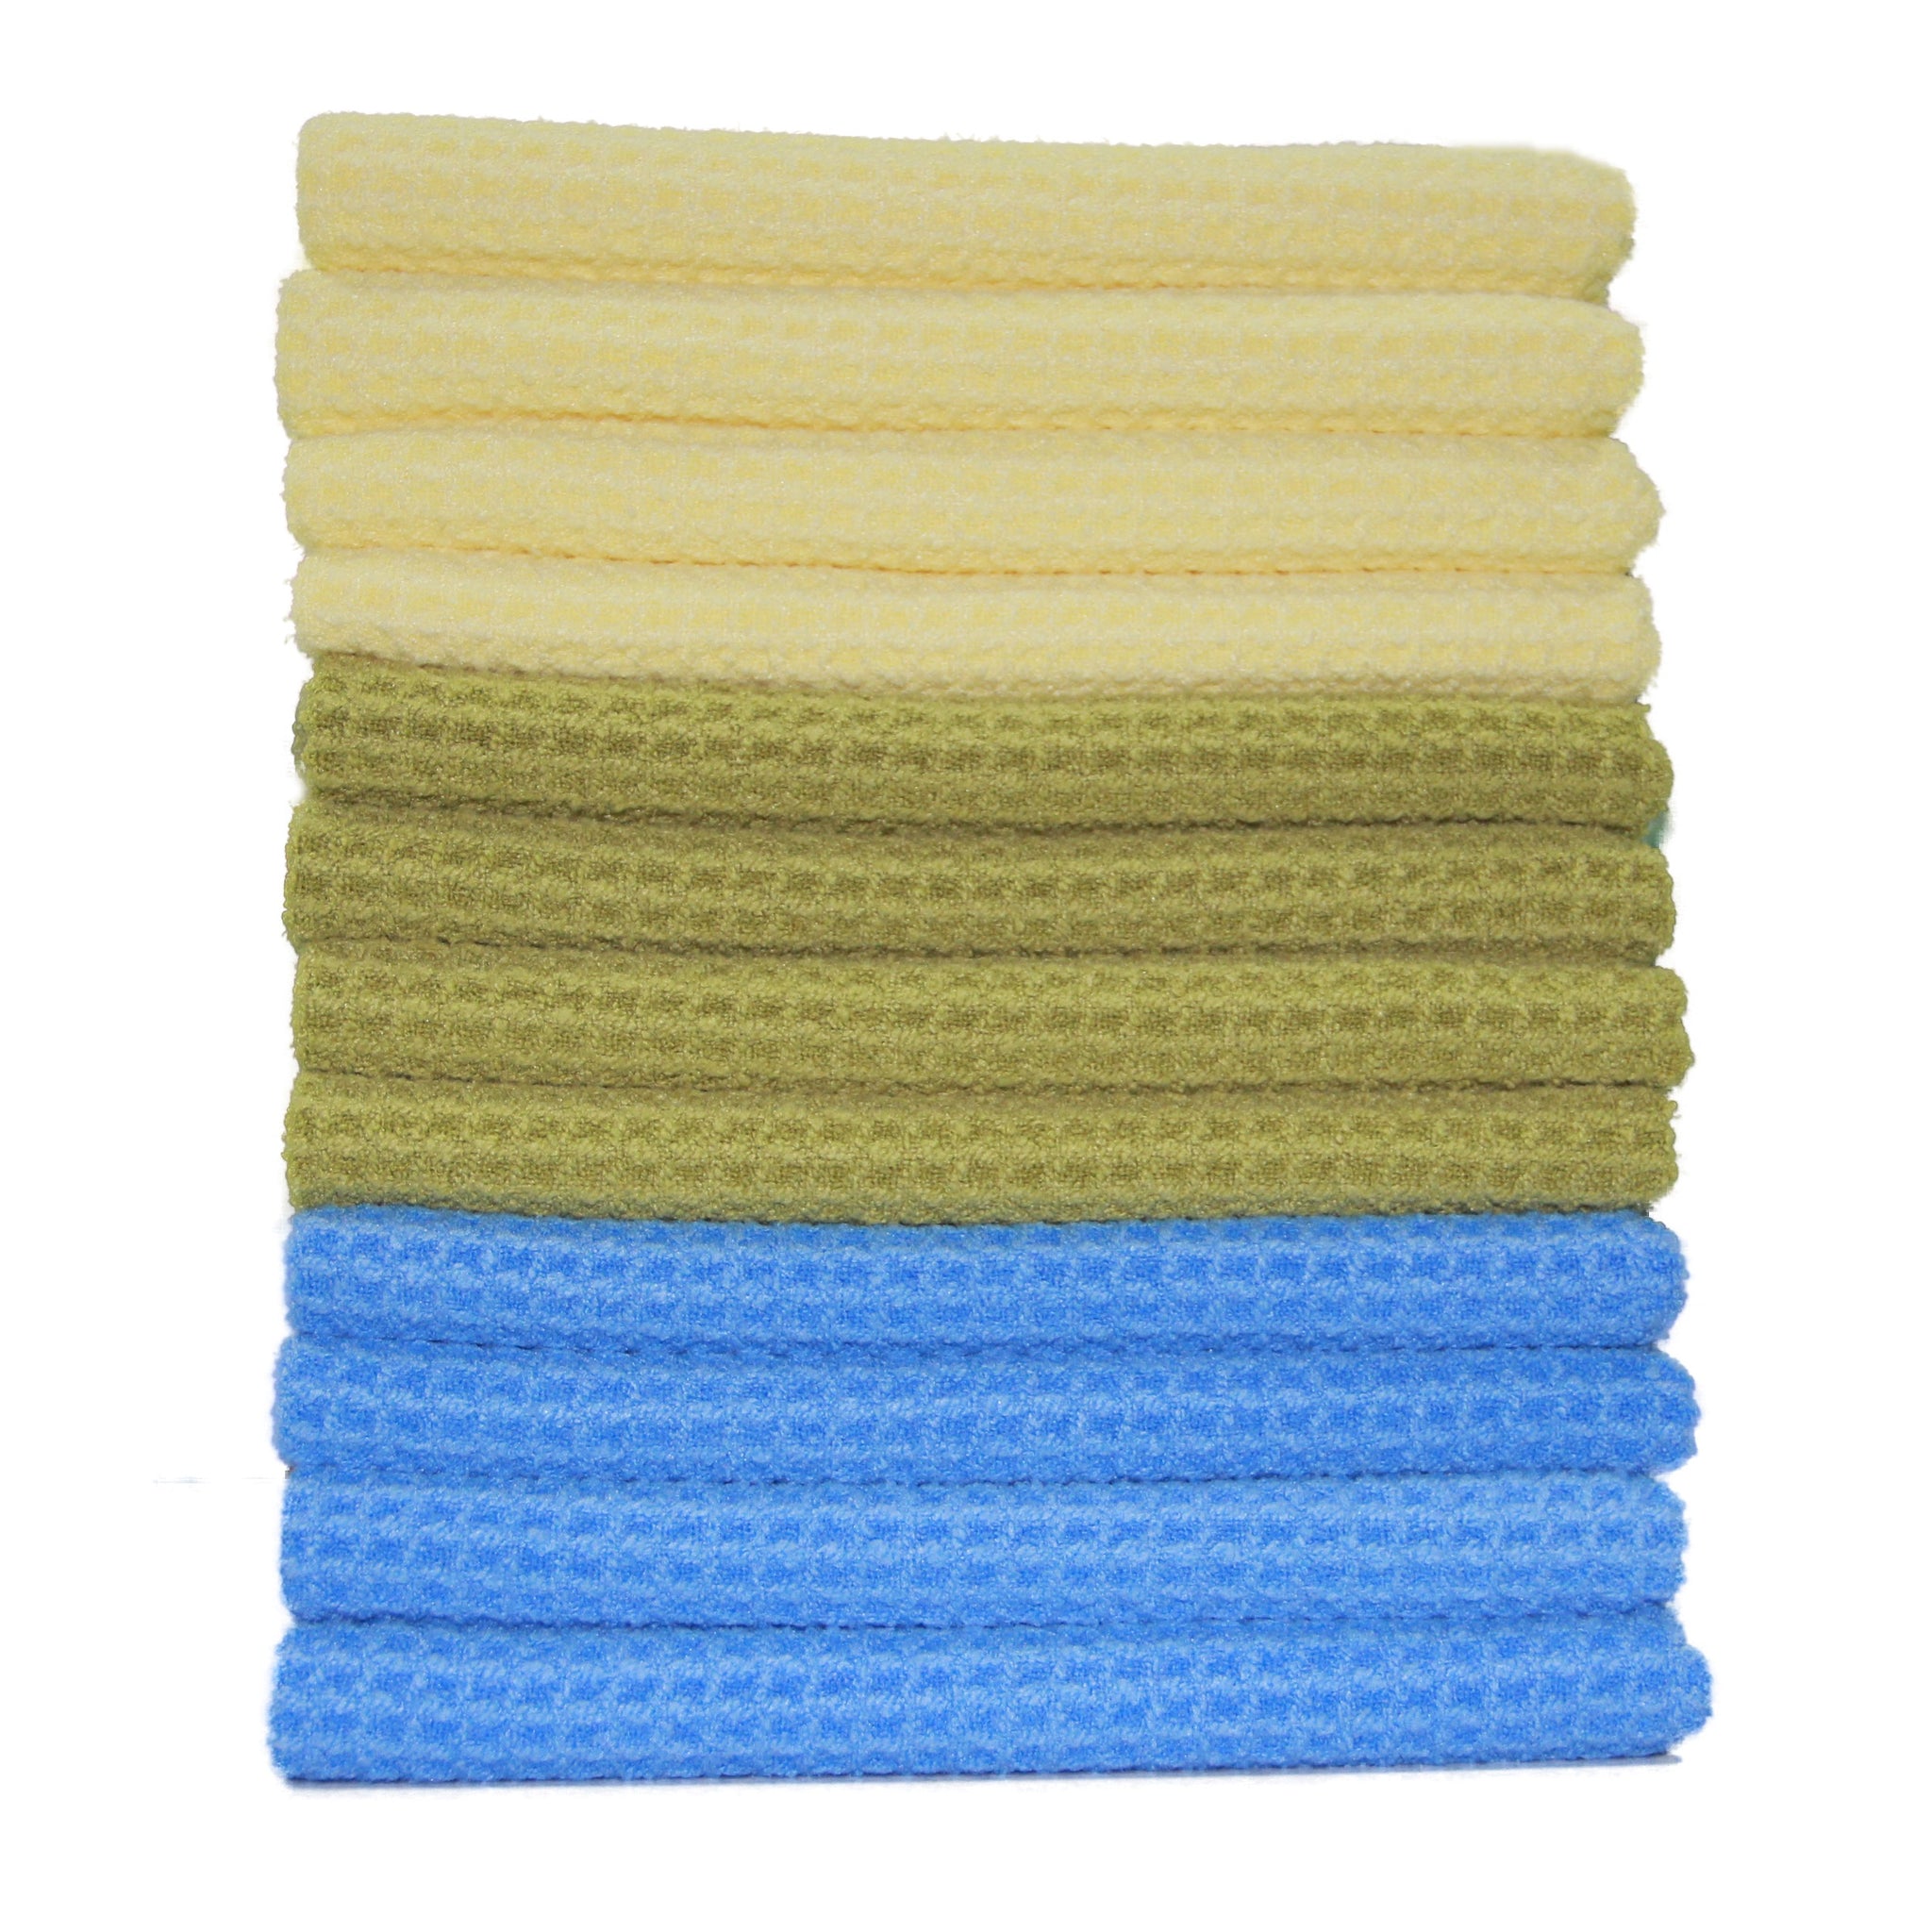 Wholesale Dishcloths 12 X 12  Kitchen Cleaning Dish Towels